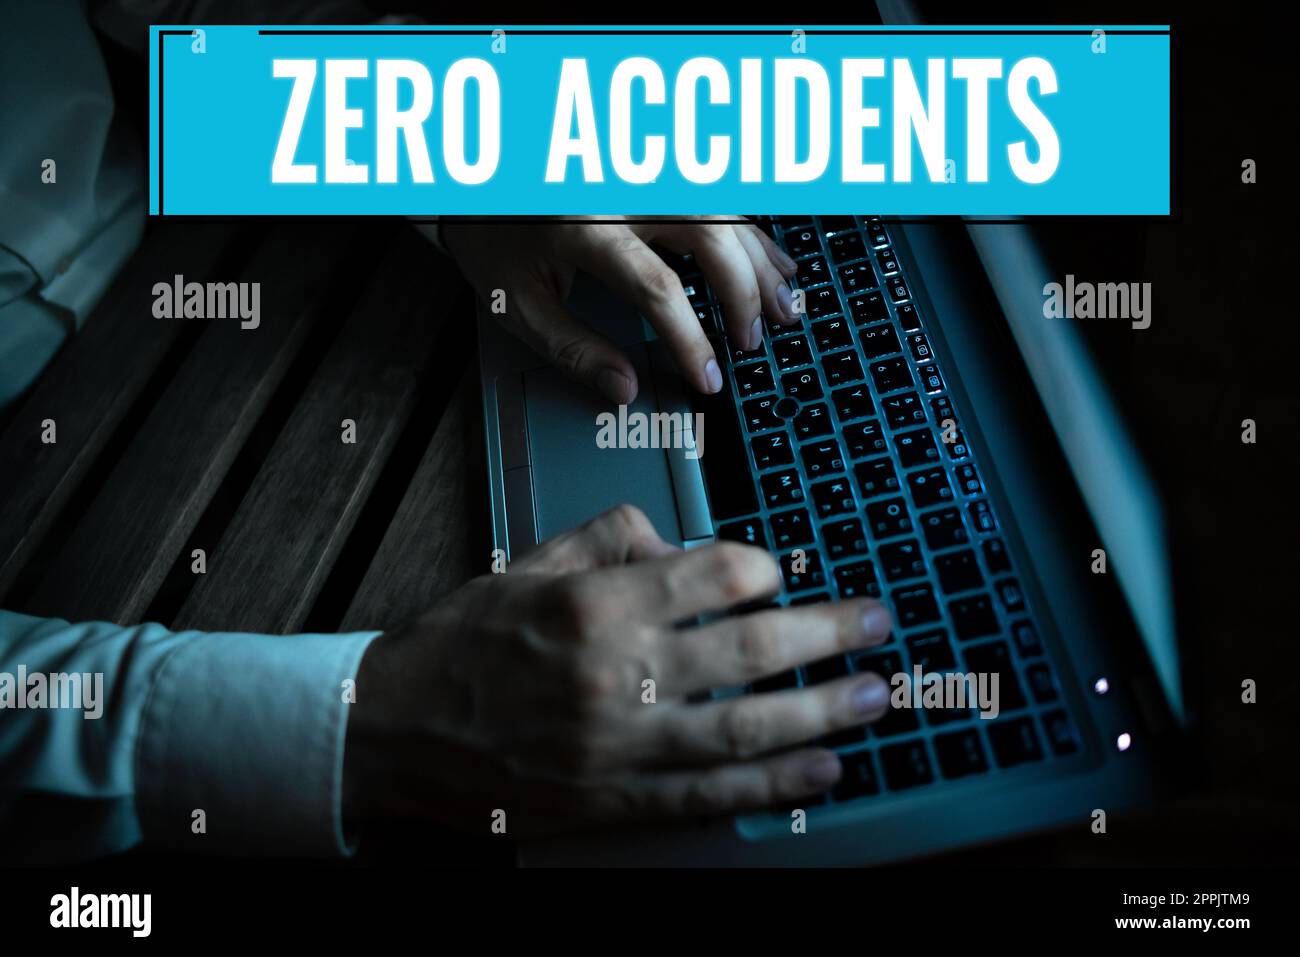 Text showing inspiration Zero Accidents. Word Written on important strategy for preventing workplace accidents Stock Photo